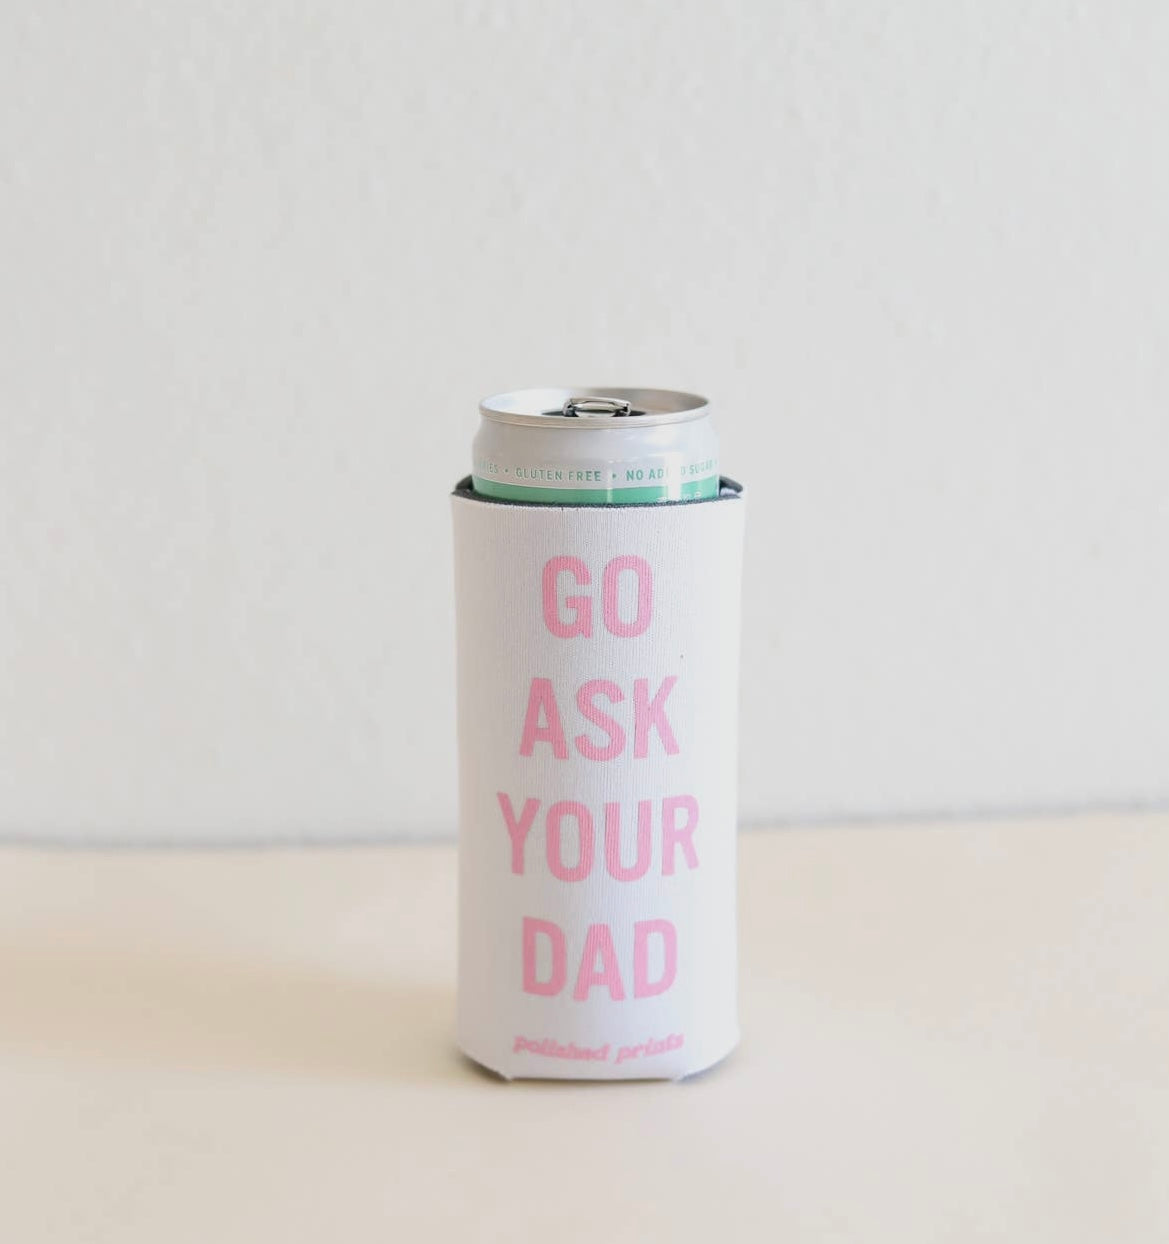 "GO ASK YOUR DAD" Collapsible Seltzer Koozie